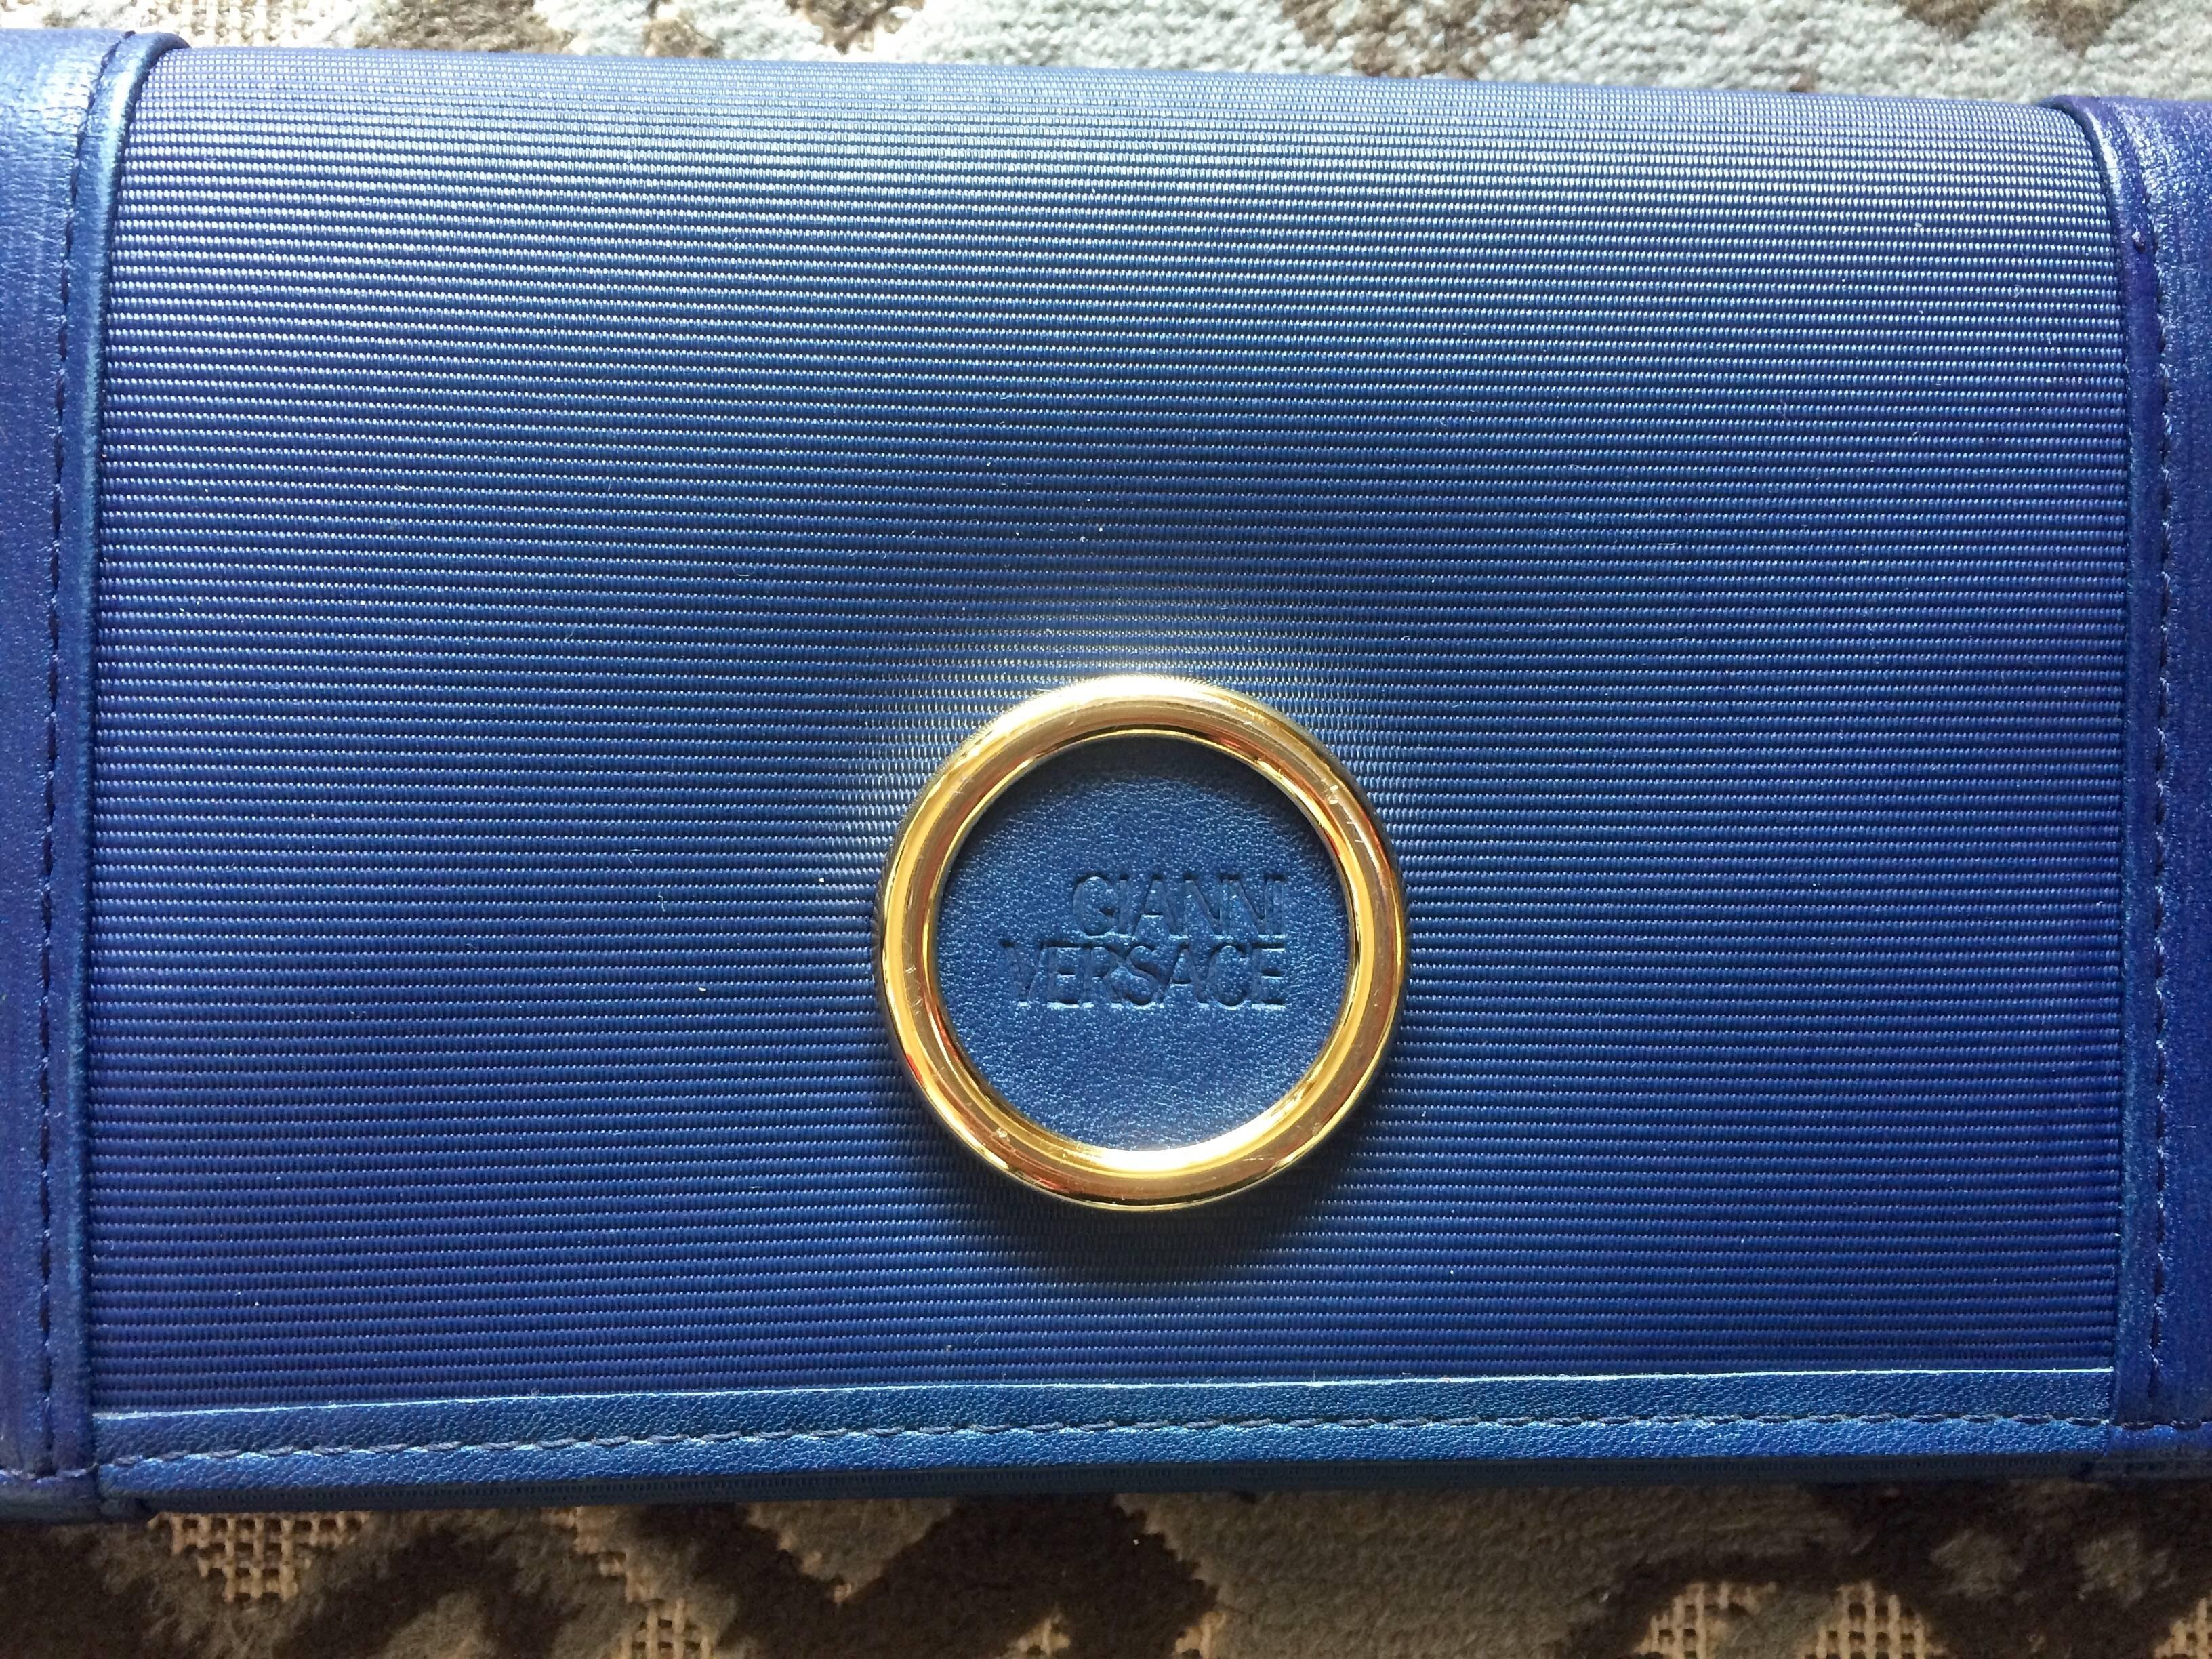 1990s. Vintage Gianni Versace blue wallet with its iconic geometric pattern and a golden round embossed logo motif. Unisex great gift.

For all Gianni Versace vintage lovers, this early 90's vintage bill wallet is the one for you.
You will love its